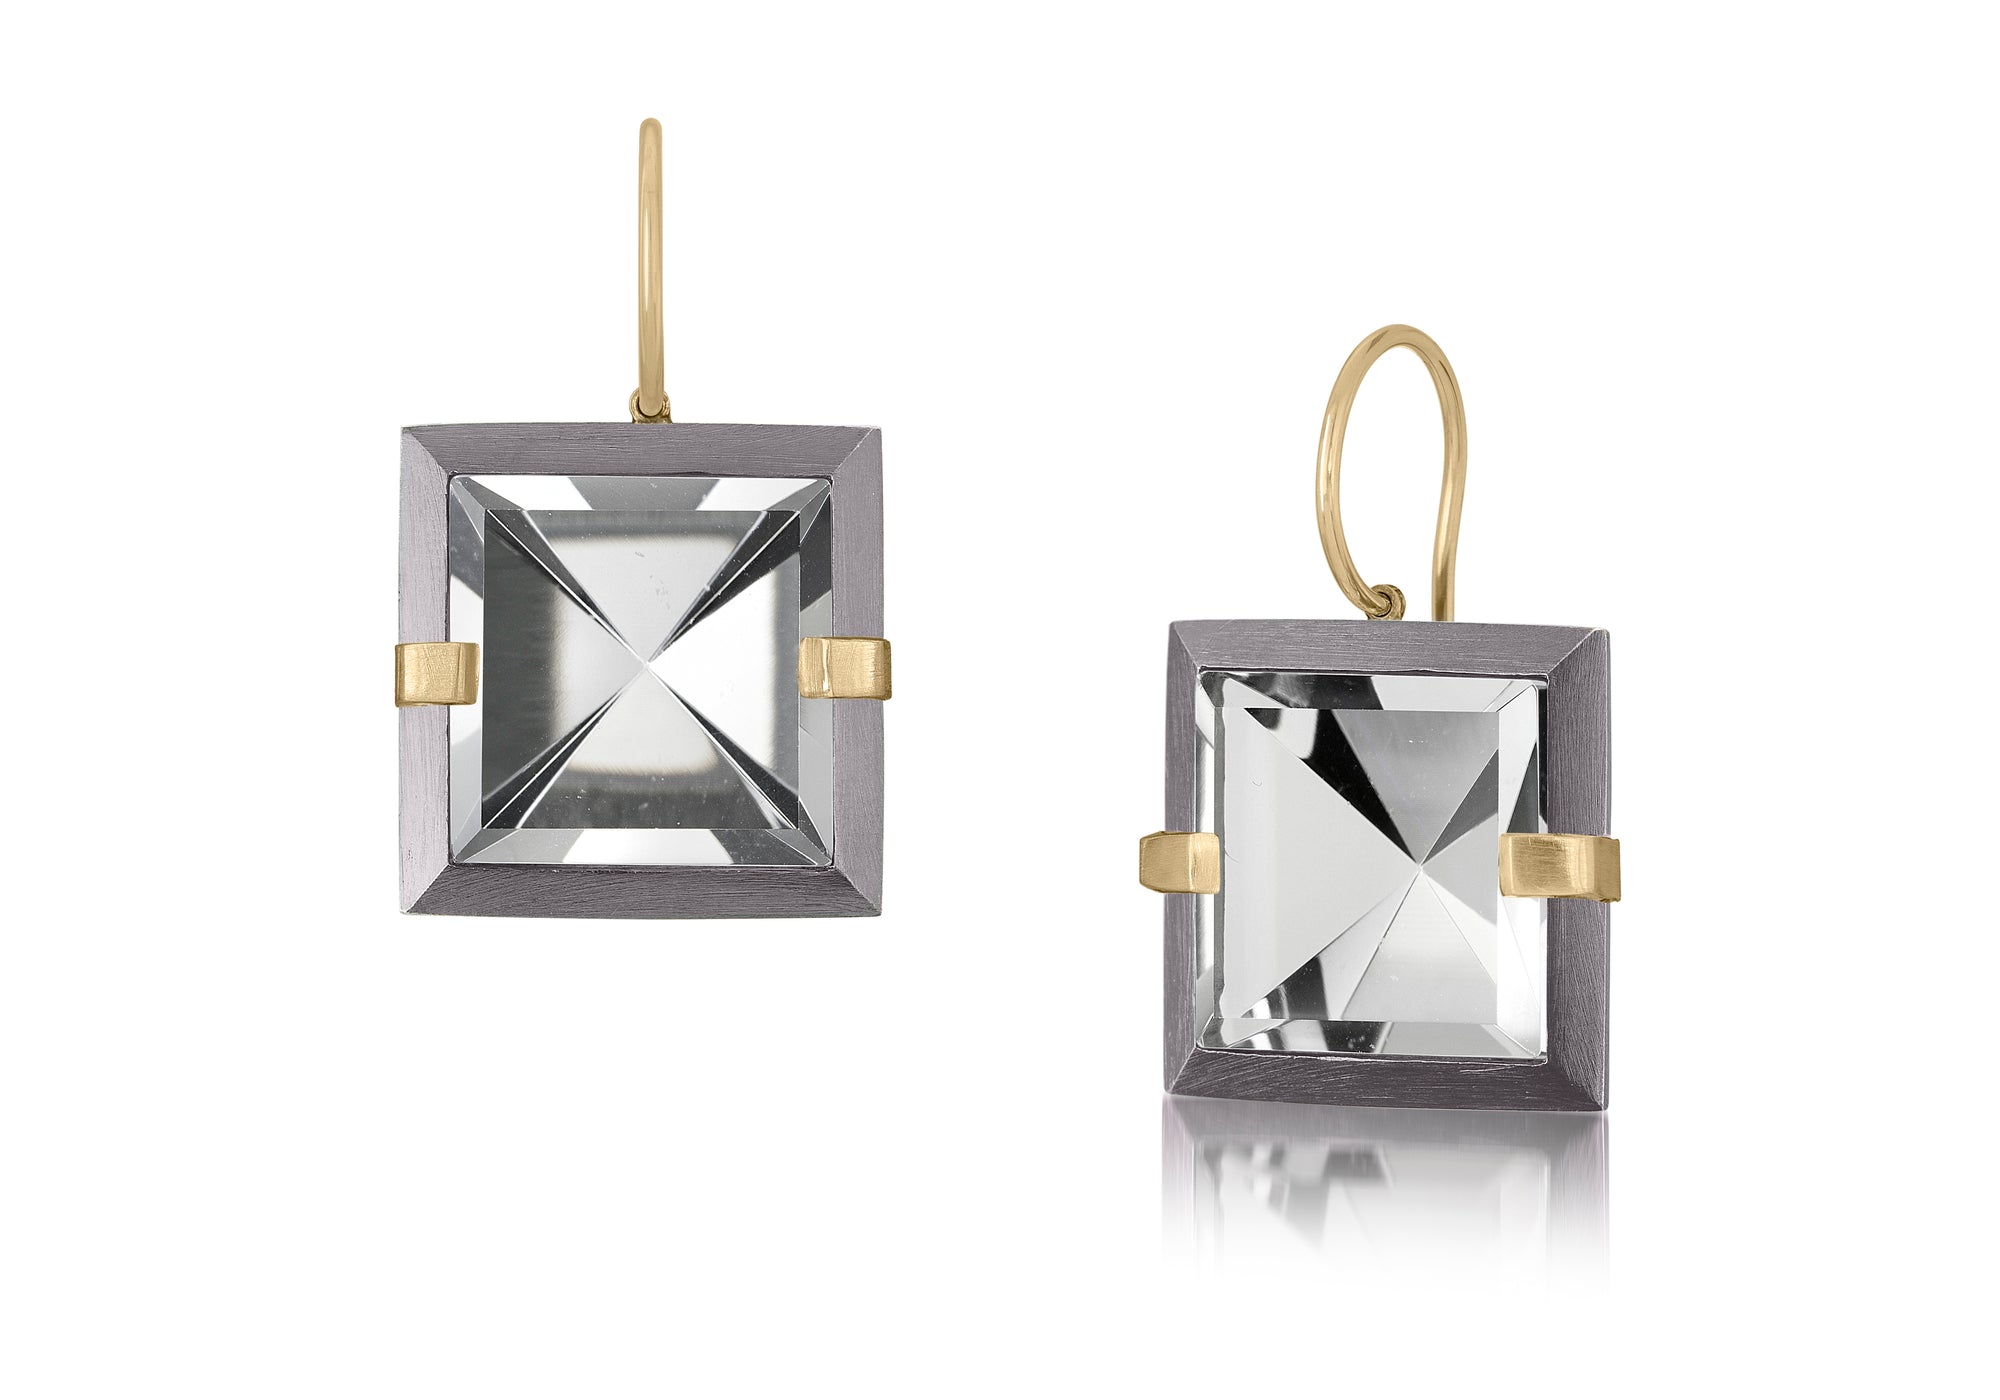 This medium style Facets drop earring is natural gemstone set in oxidized silver and 18k gold. Crisp and sparkling faceted squares of natural stone are accented with 18k gold prongs and hang from 18k gold ear wires. Gemstone 12.64- 14.56 tcw.